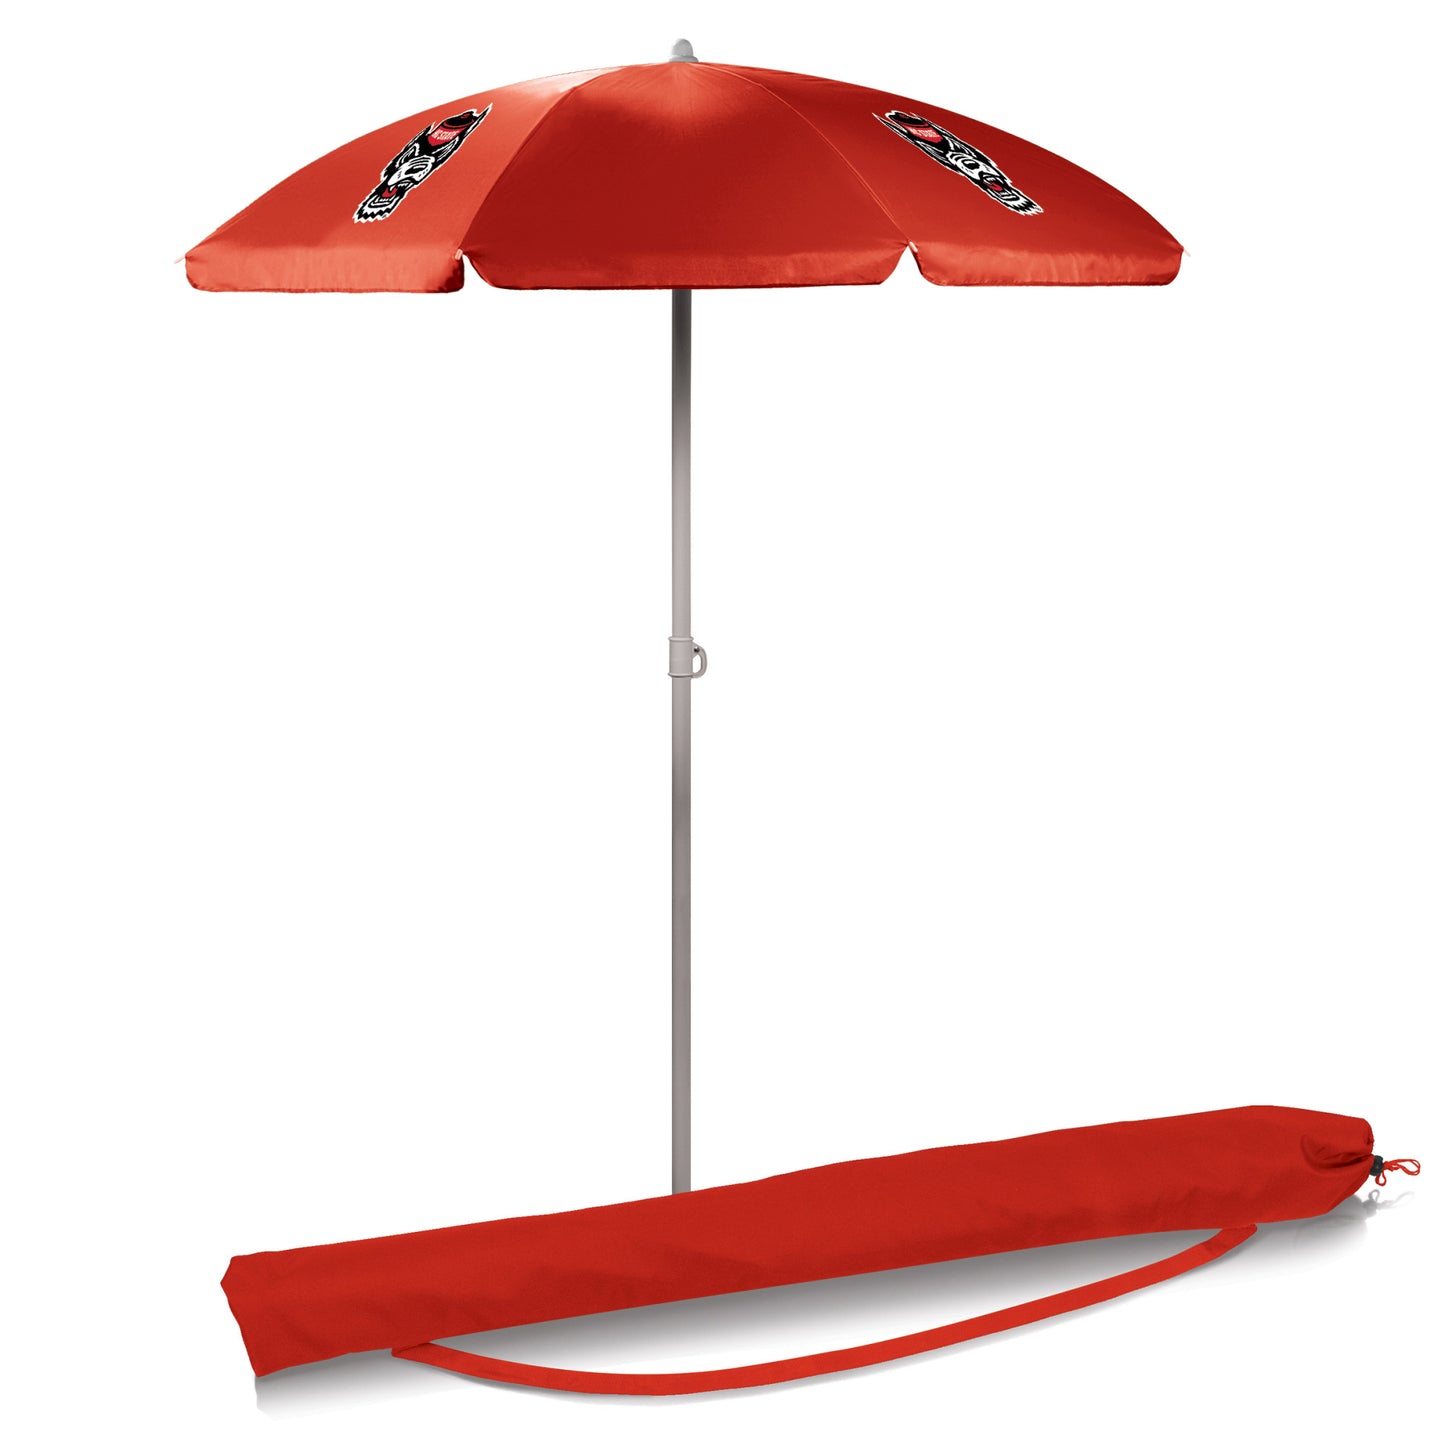 North Carolina State Wolfpack 5.5' Portable Red Beach Umbrella by Picnic Time